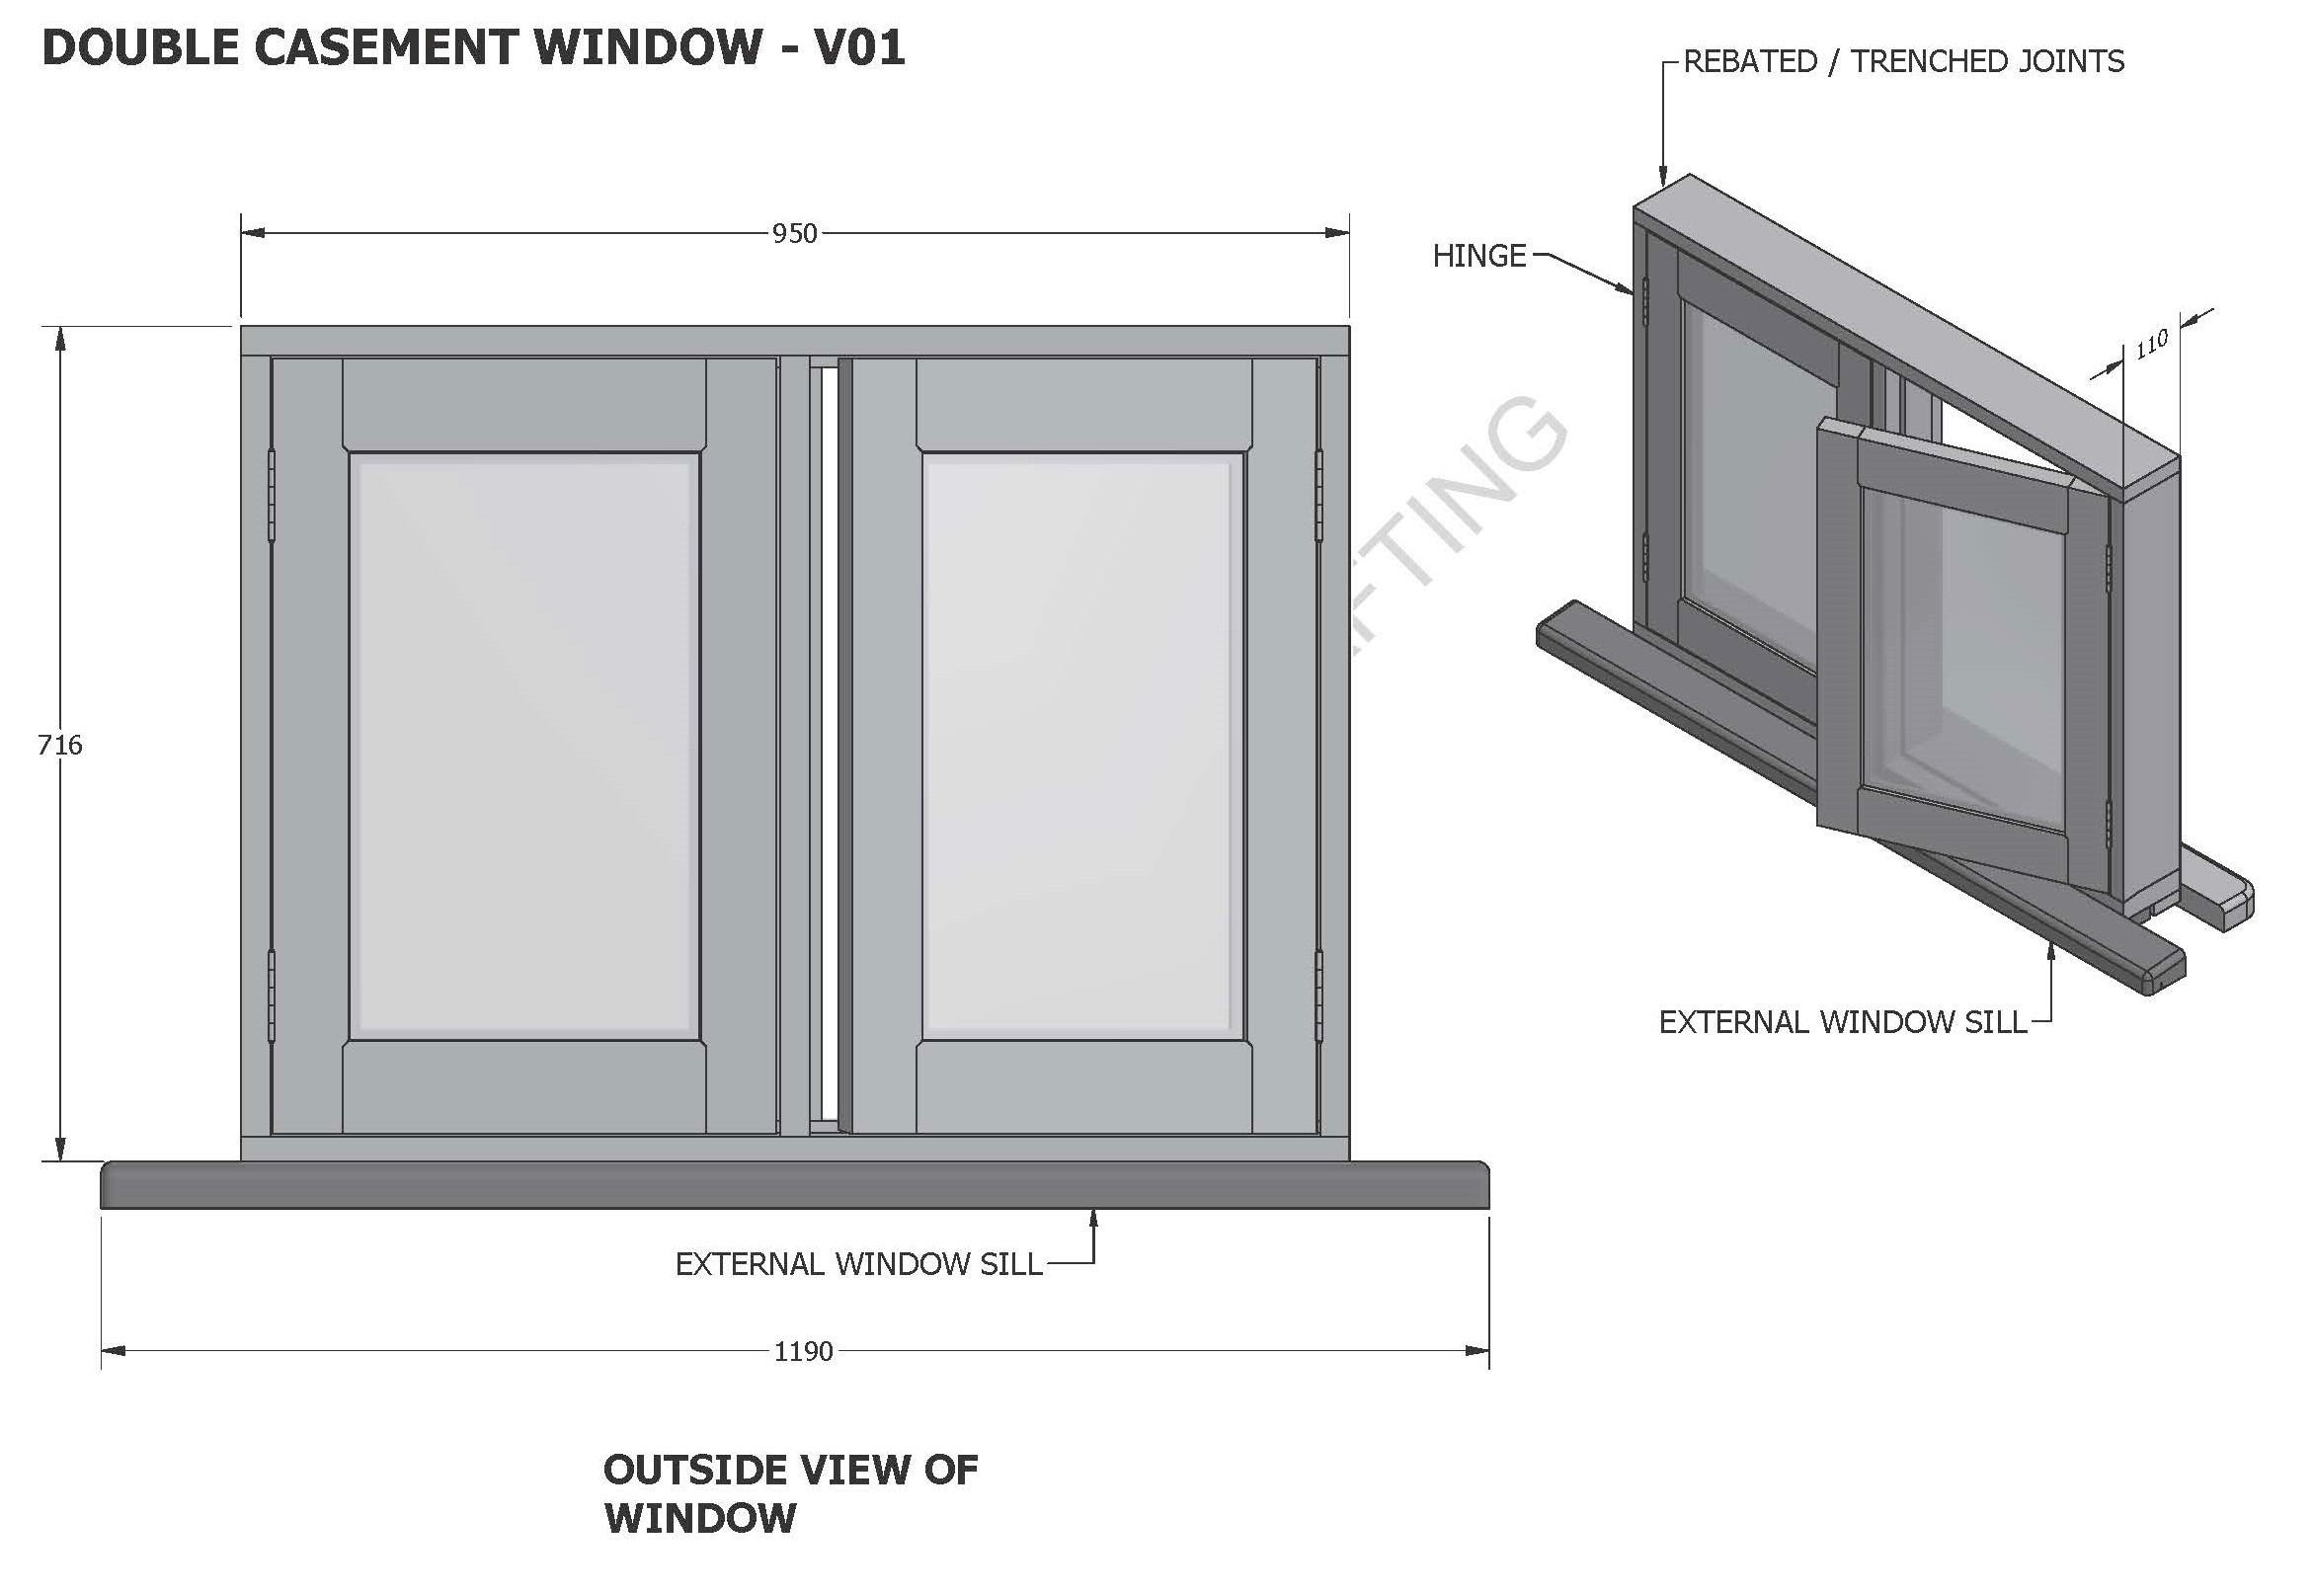 DOUBLE CASEMENT WINDOWS V01 - Build your own and SAVE BIG $$$